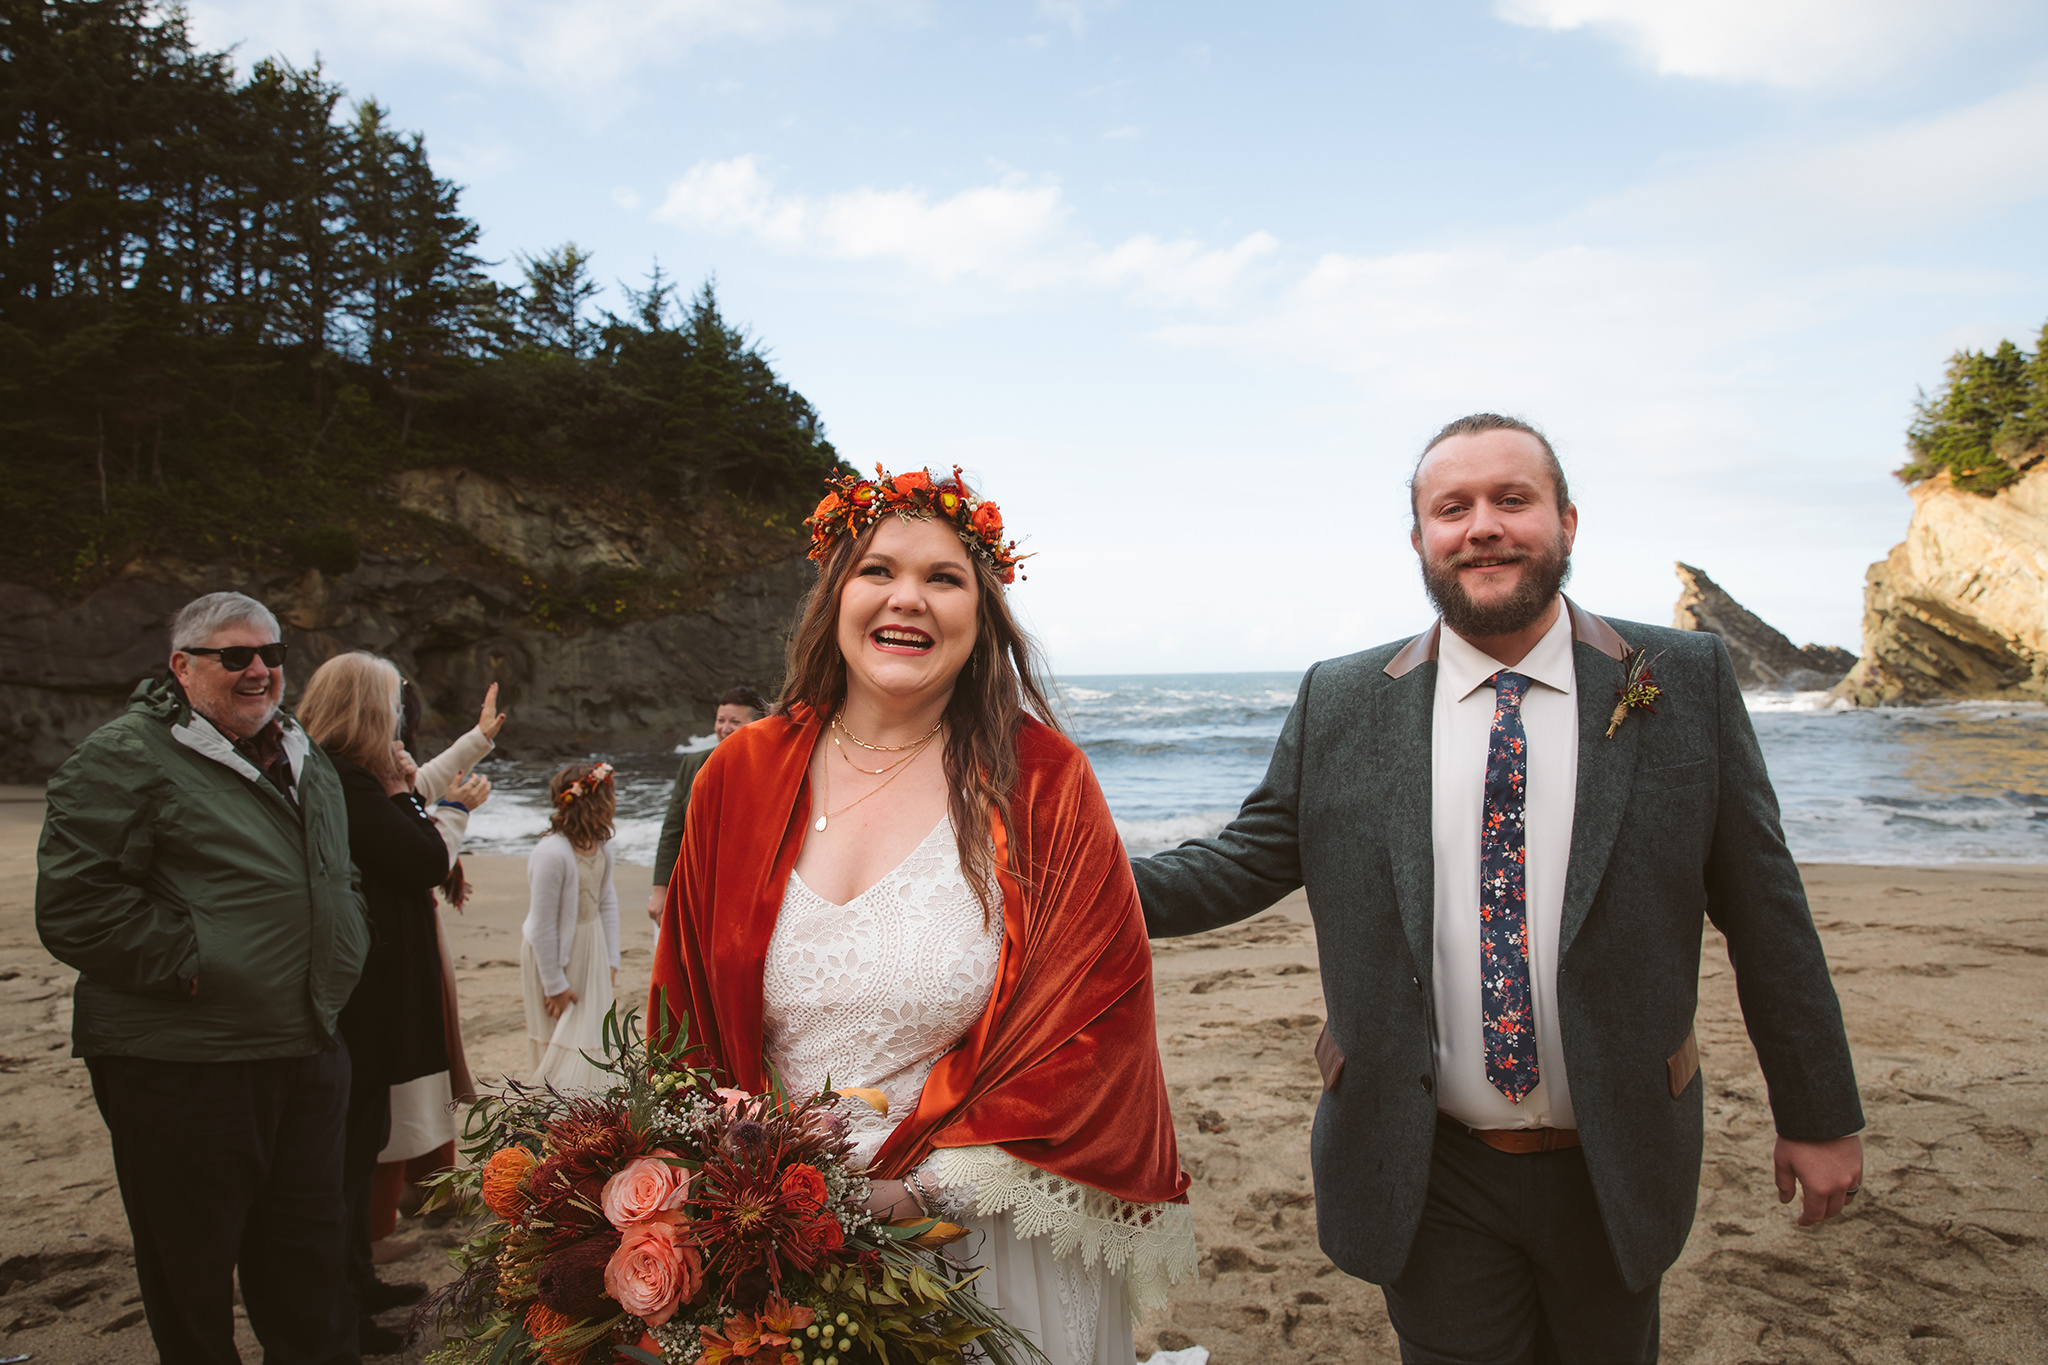 A bride and groom walking together with the ocean in the background after their Oregon coast wedding ceremony